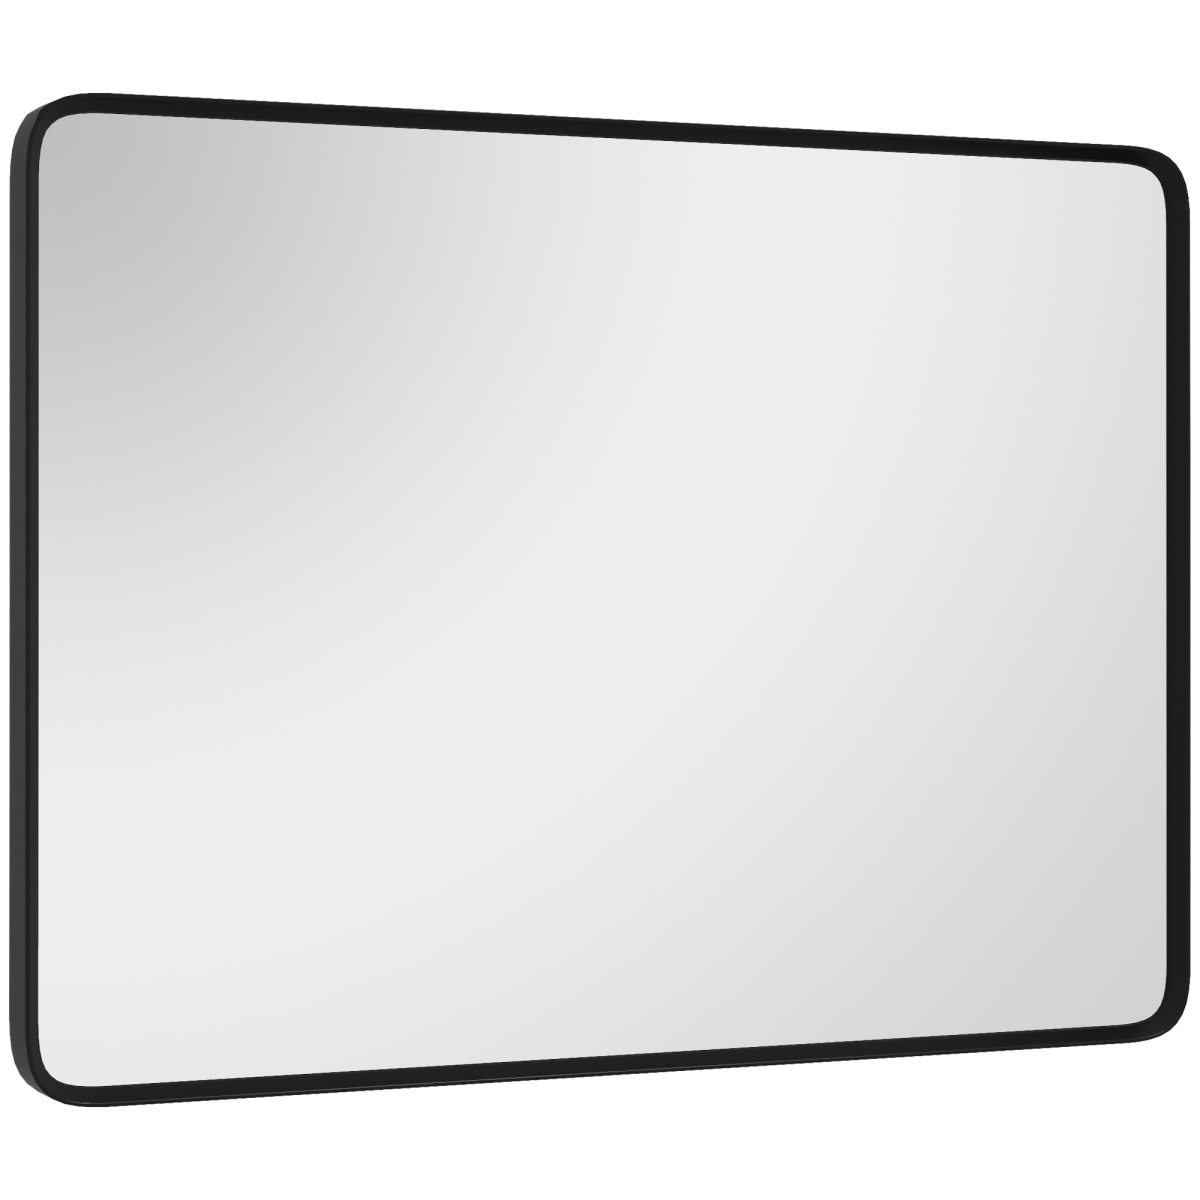 Picture of 212 Main 830-763V82CR 30 x 22 in. Homcom Wall-Mounted Living Room Rectangle Mirror